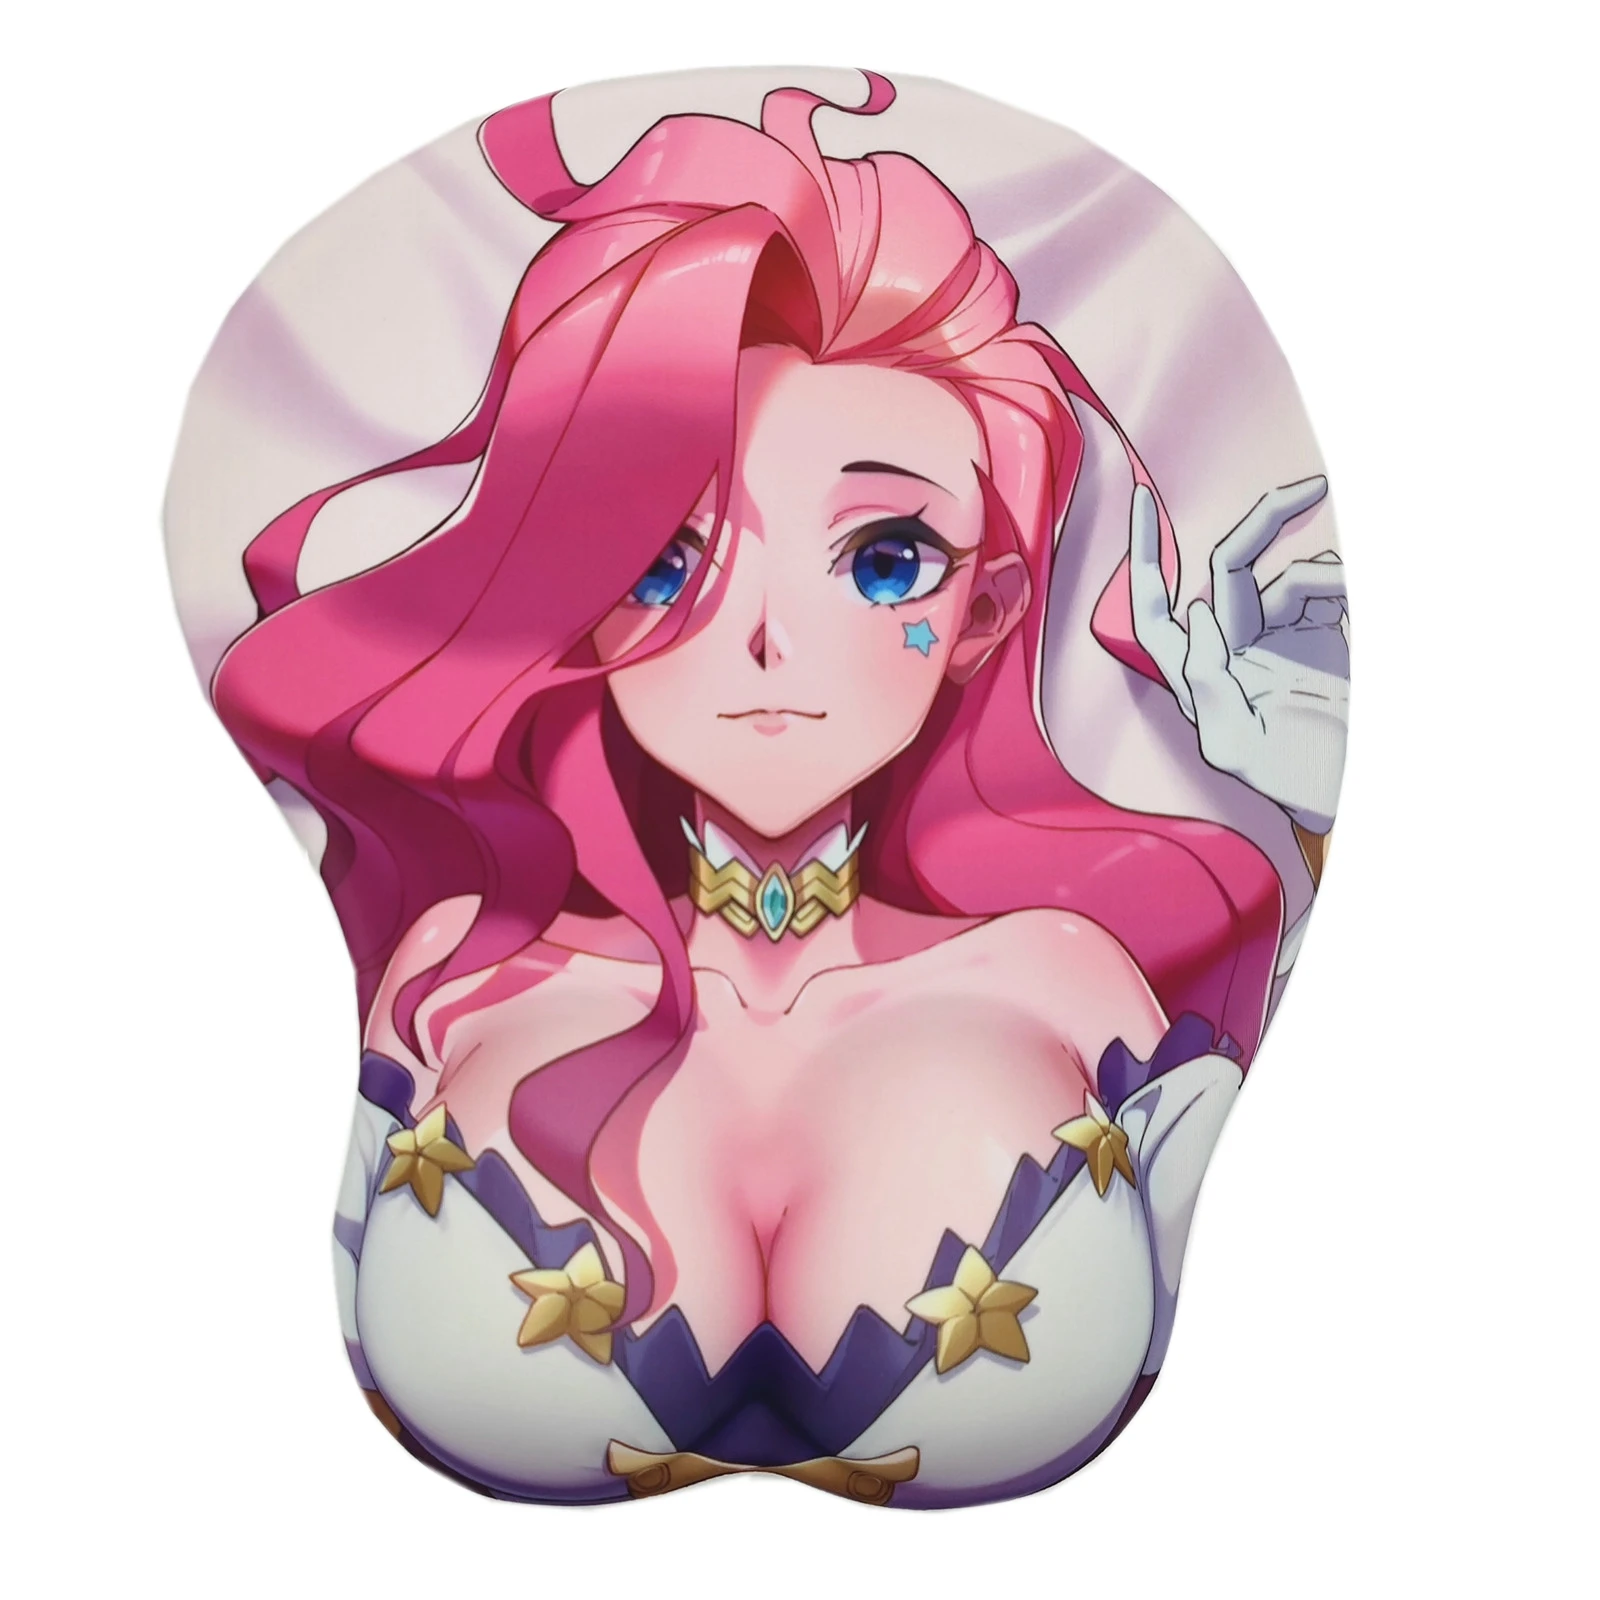 EVA Asuka Langley Soryu 3D Breast Chest Bust Mouse pad Wrist Rest Anime Play Mat 